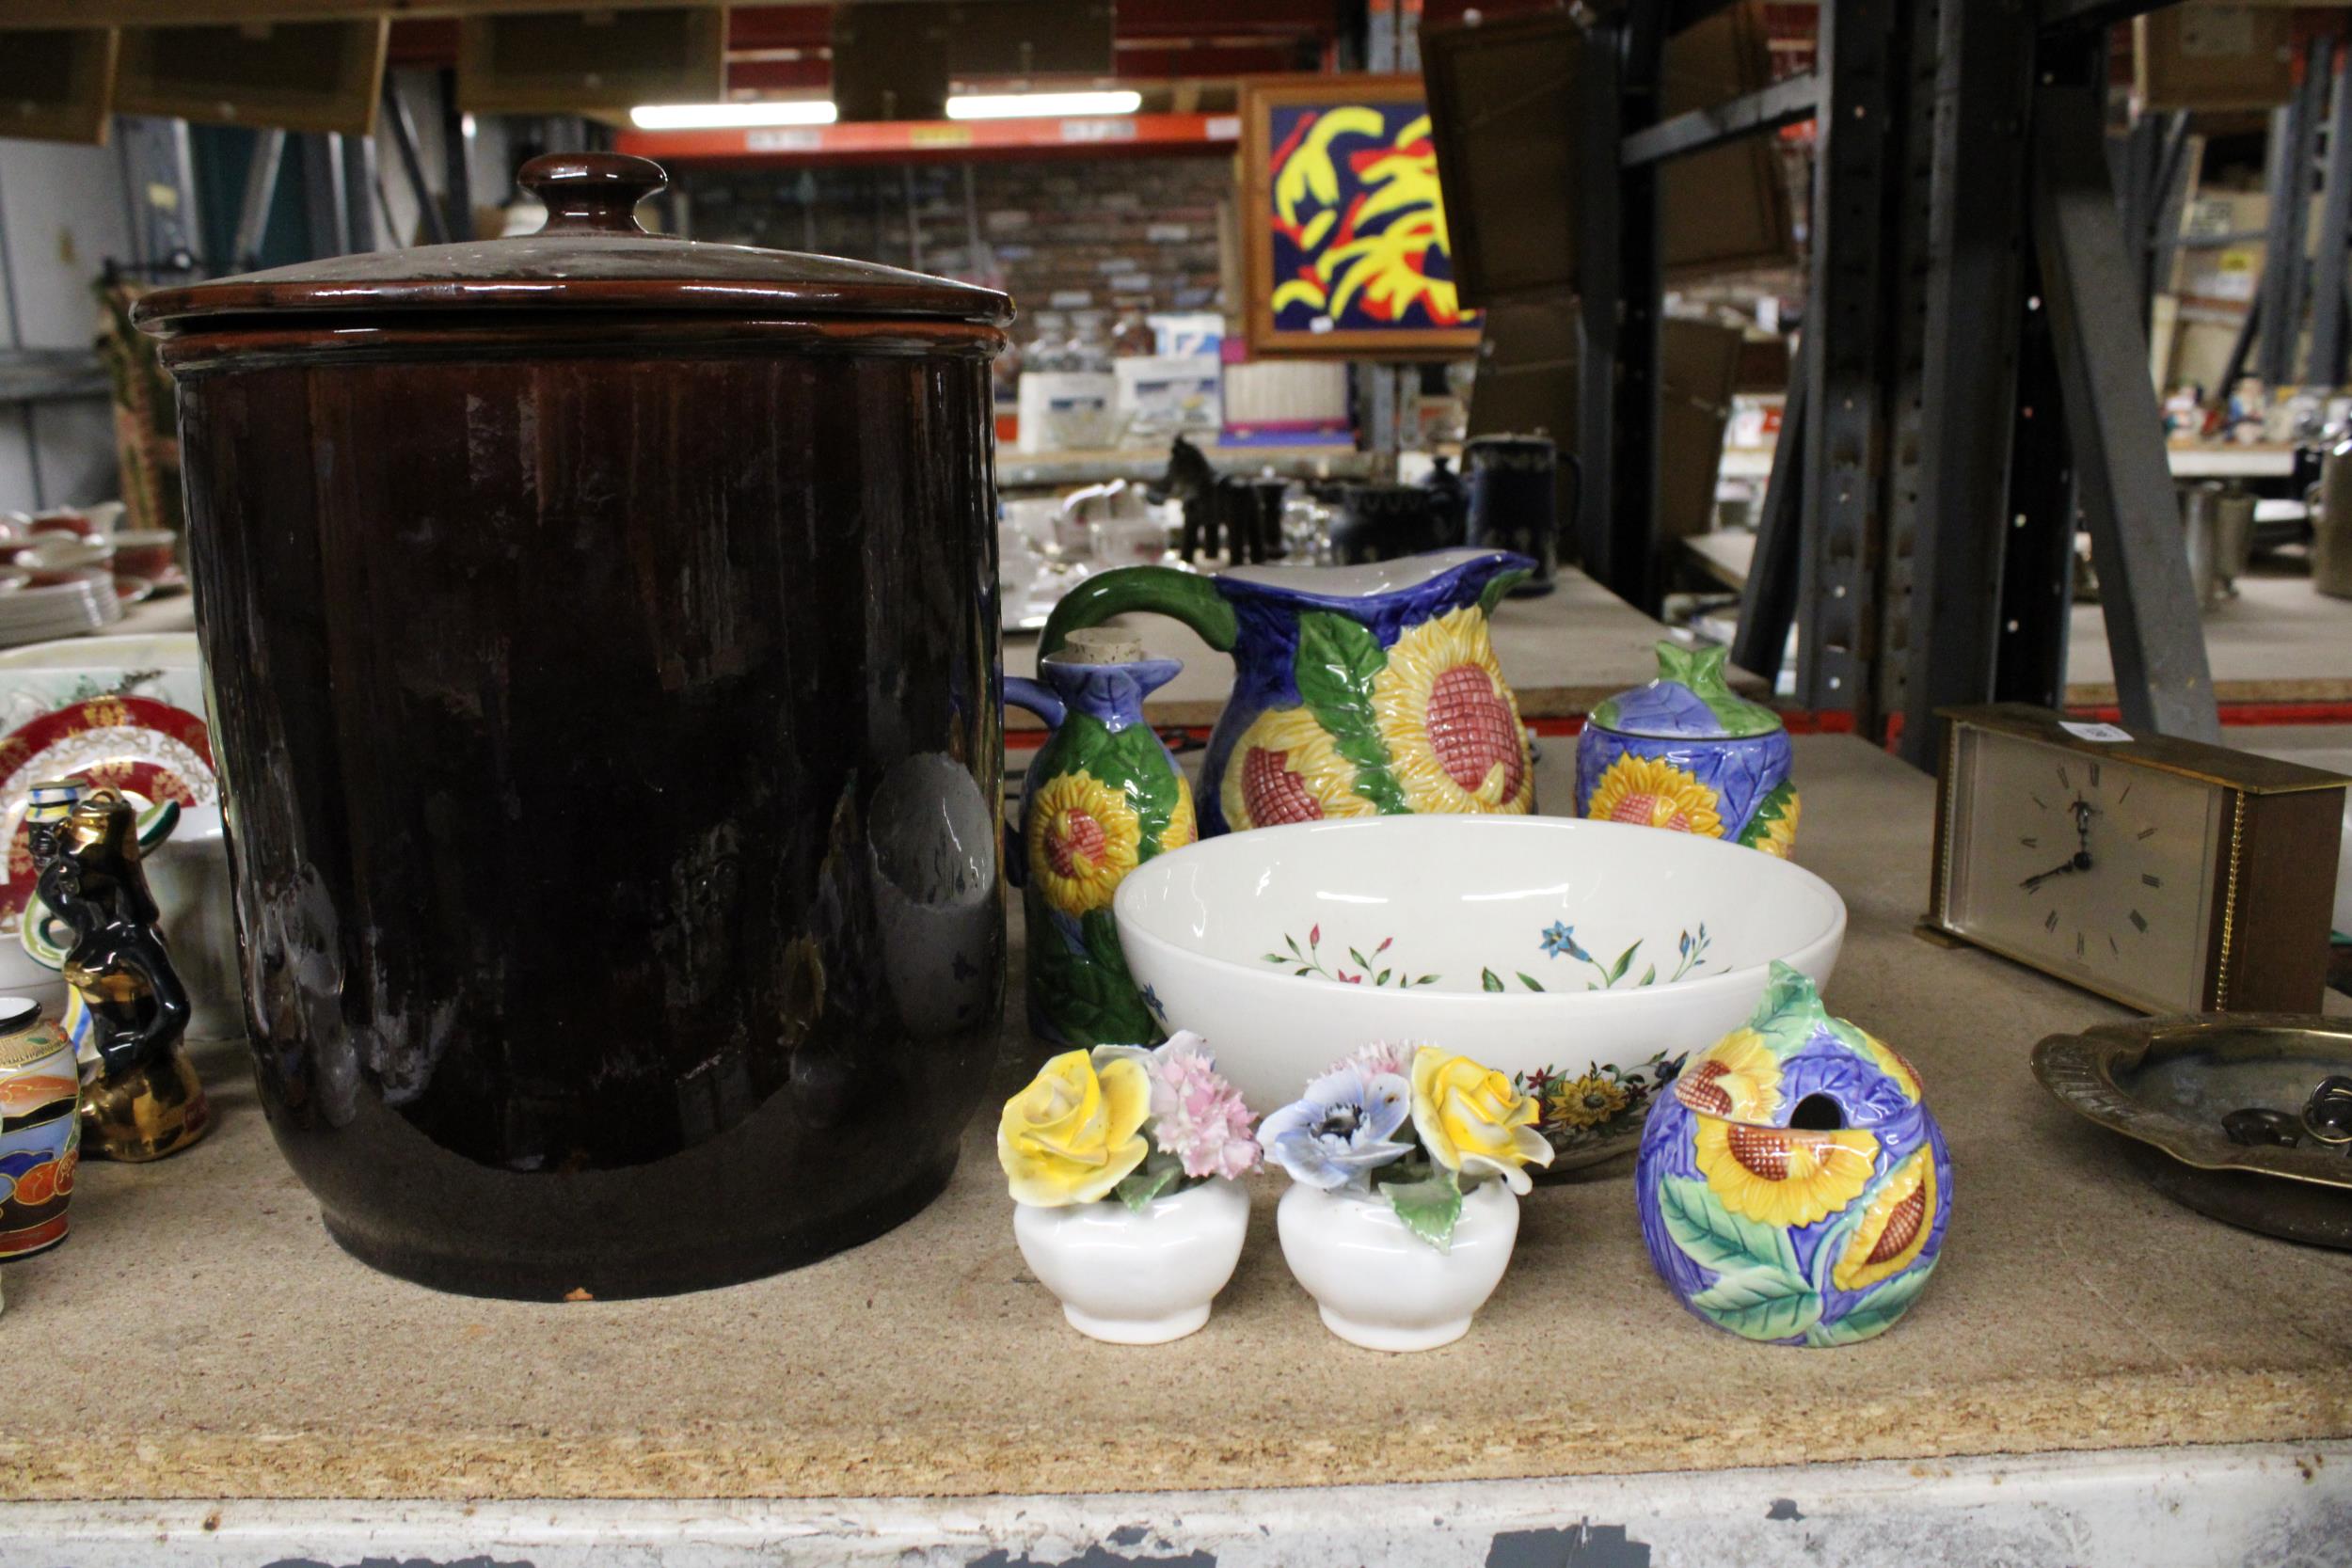 A QUANTITY OF CERAMICS TO INCLUDE A LARGE STONEWARE STORAGE JAR, A FLORAL PATTERNED JUG, OIL